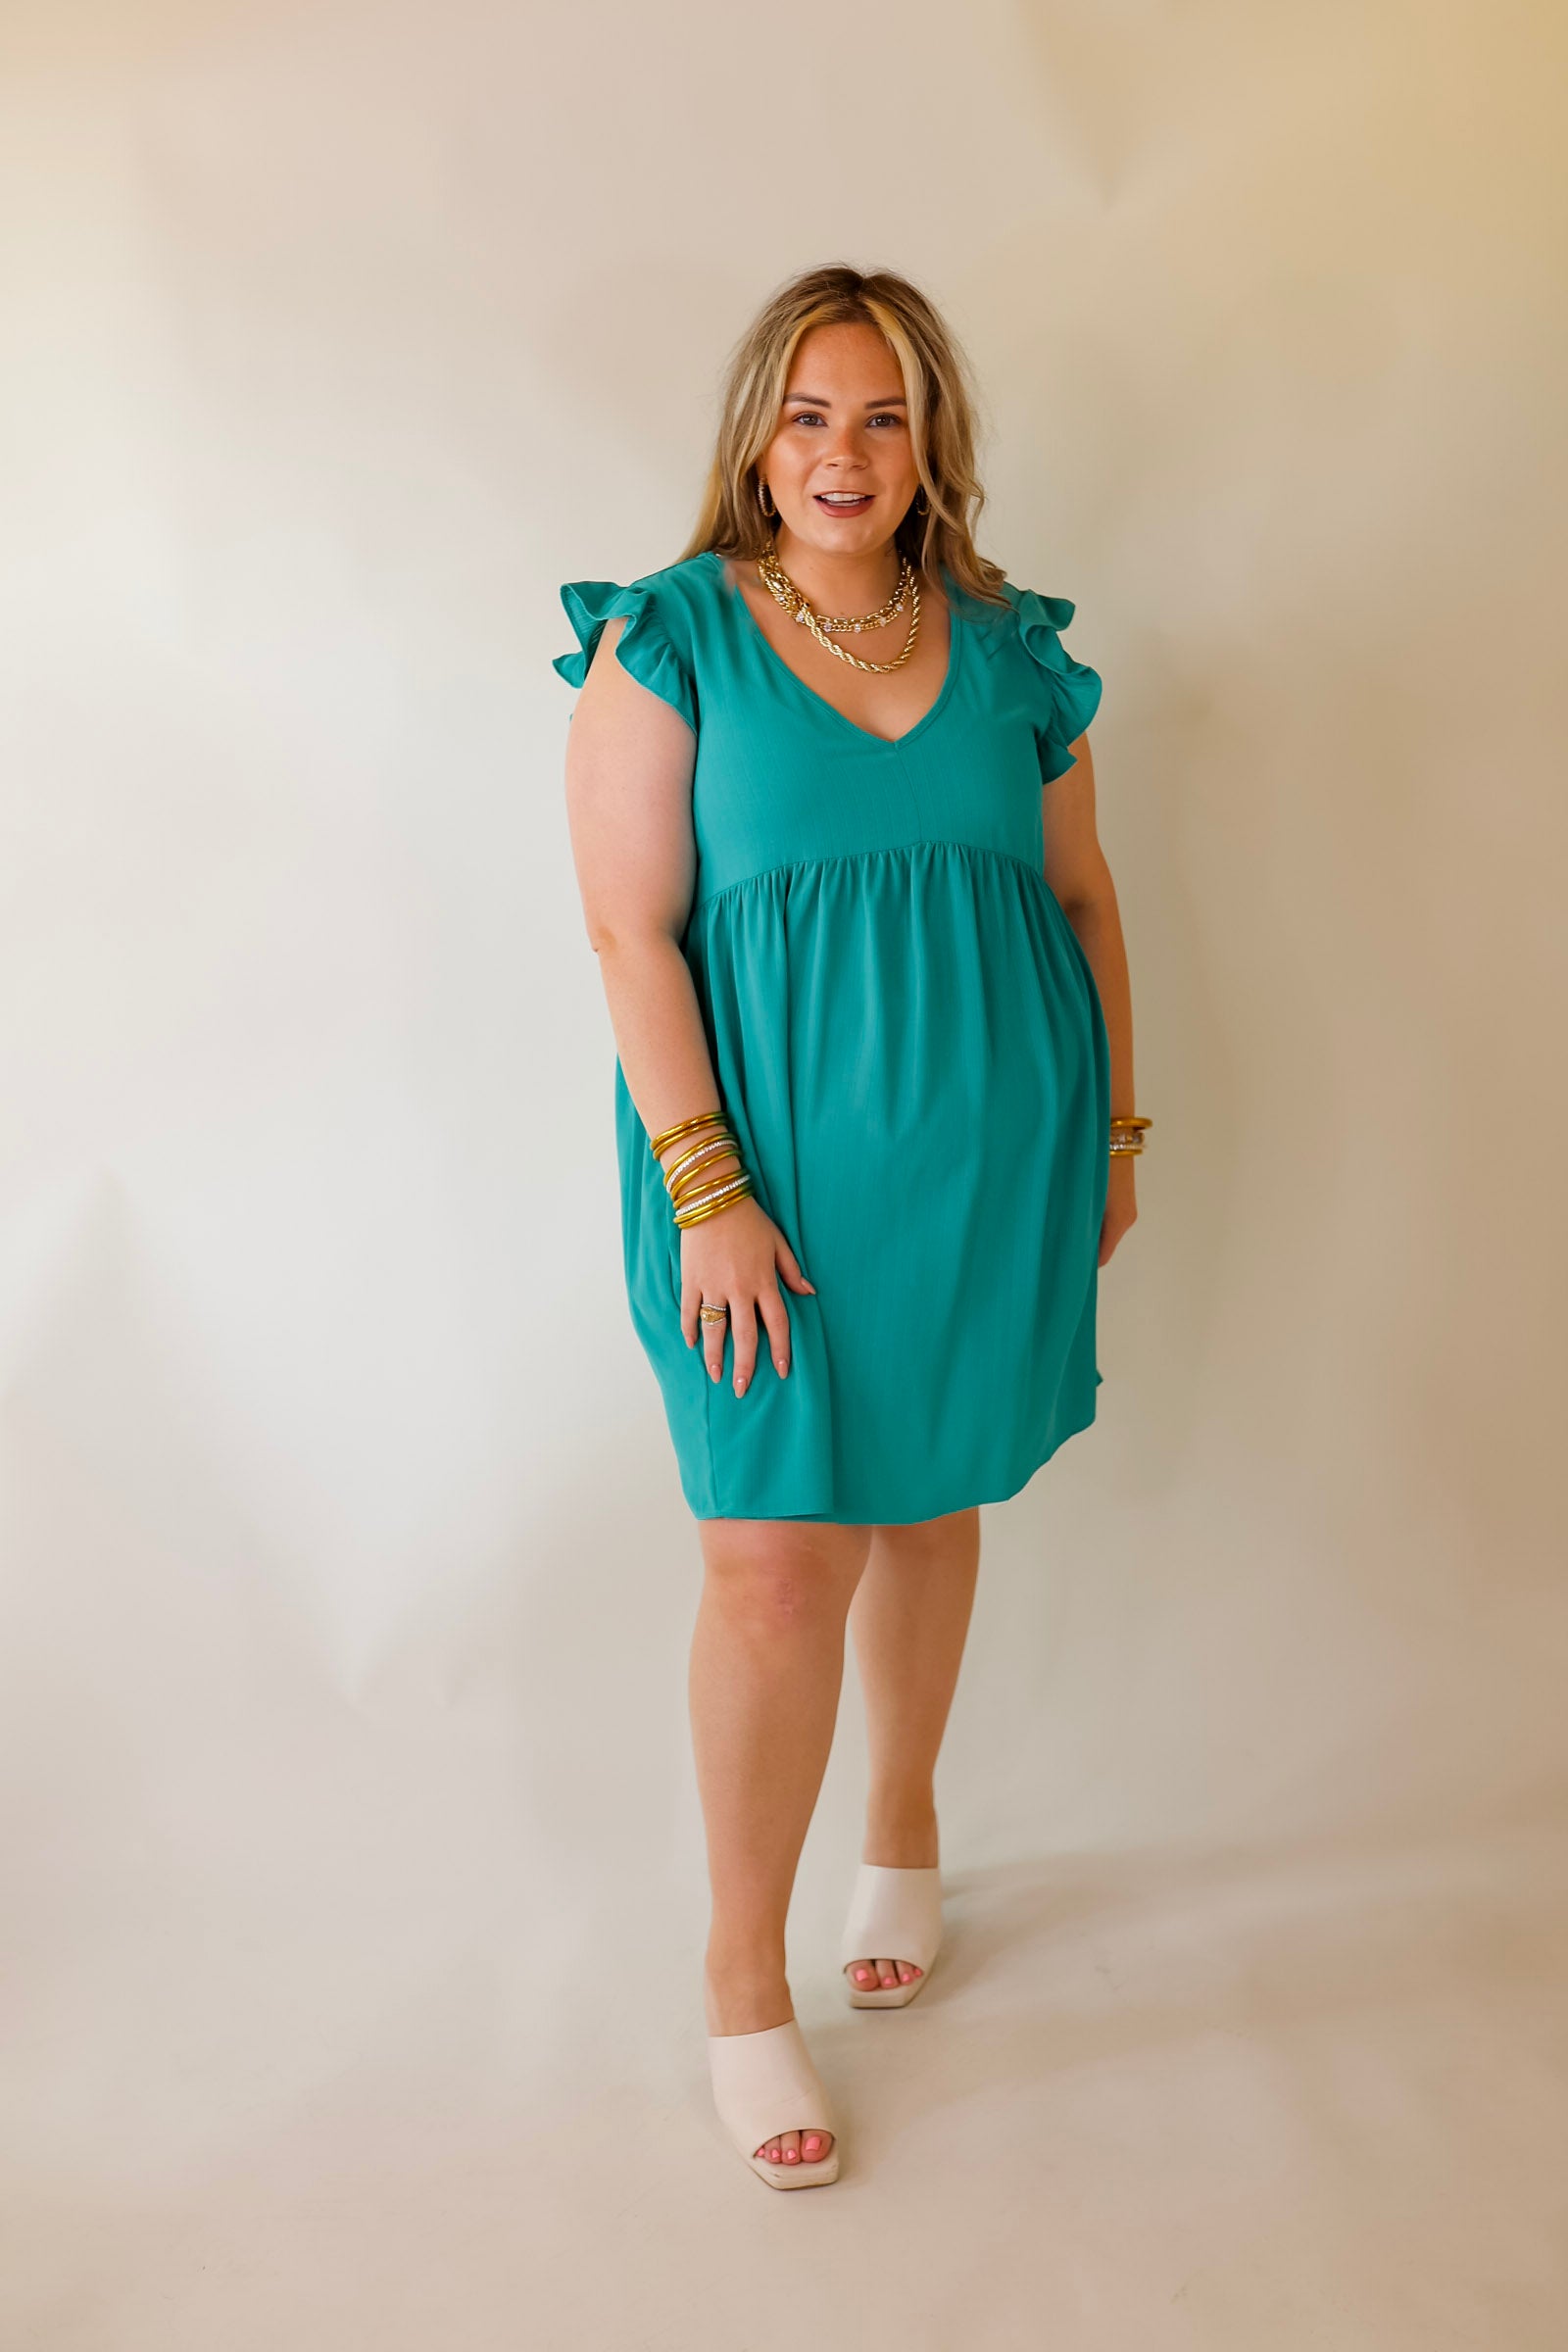 Capture Your Attention V Neck Dress with Ruffle Cap Sleeves in Turquoise - Giddy Up Glamour Boutique